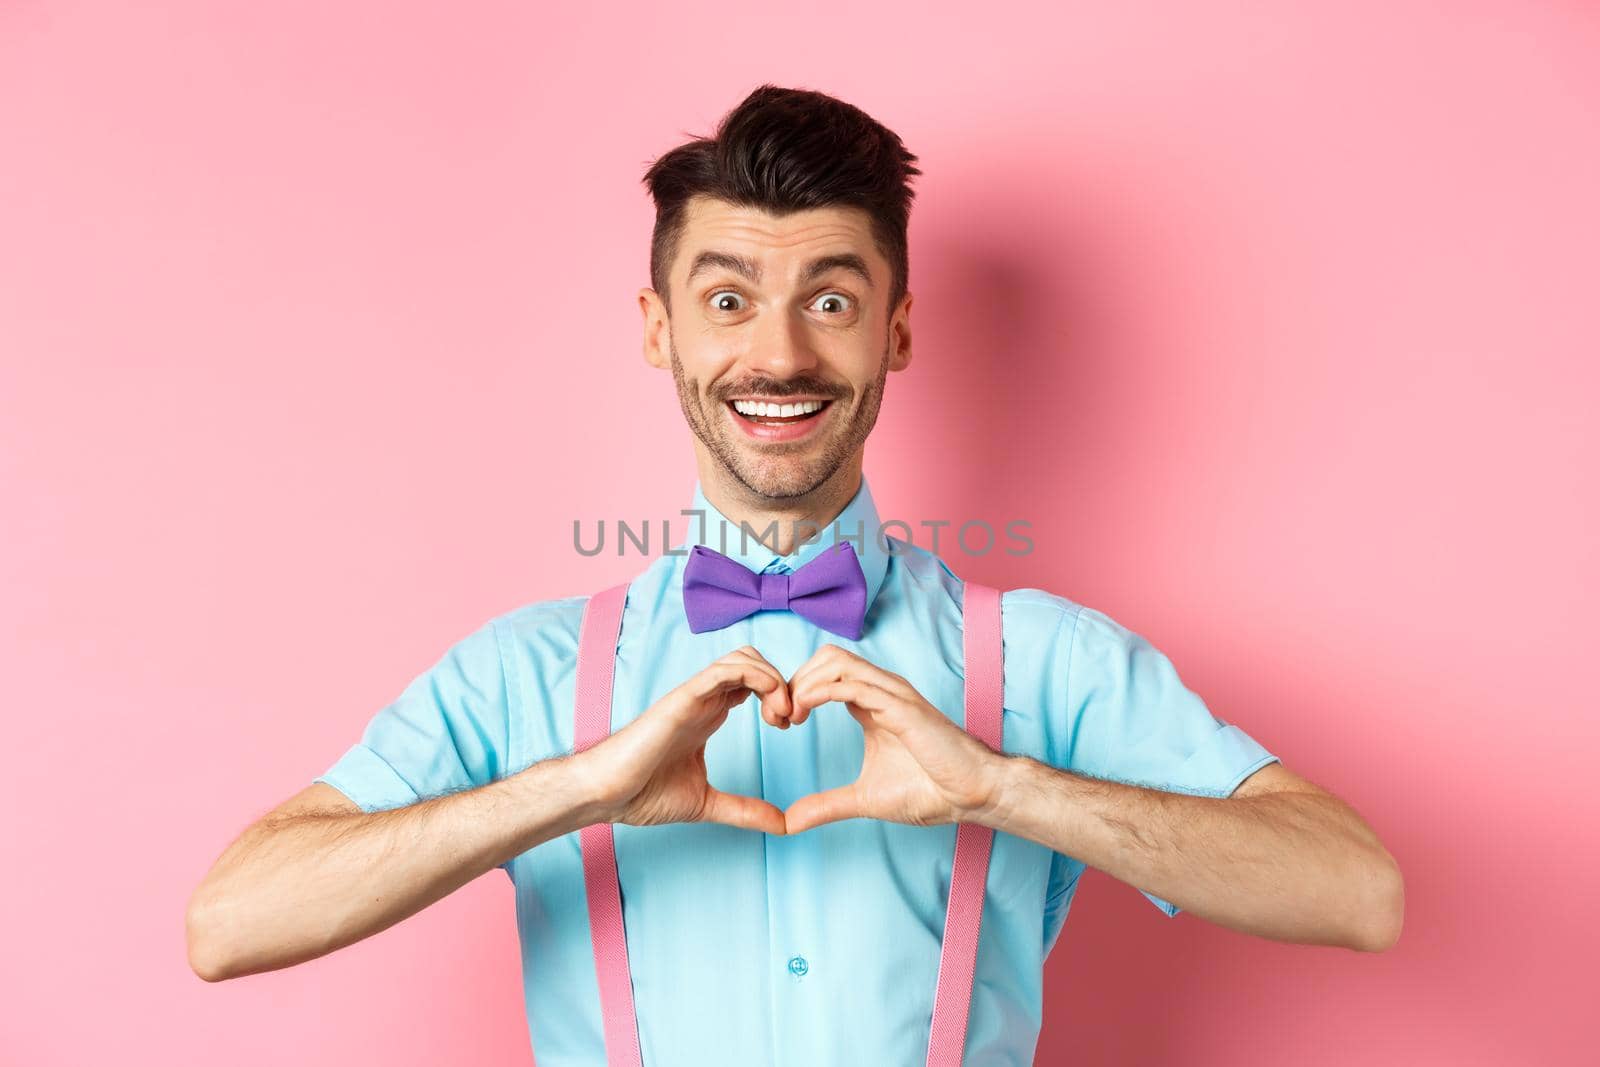 Happy Valentines day. Smiling funny guy with moustache showing heart sign and looking at lover, saying I love you, express feeling, standing over romantic pink background.